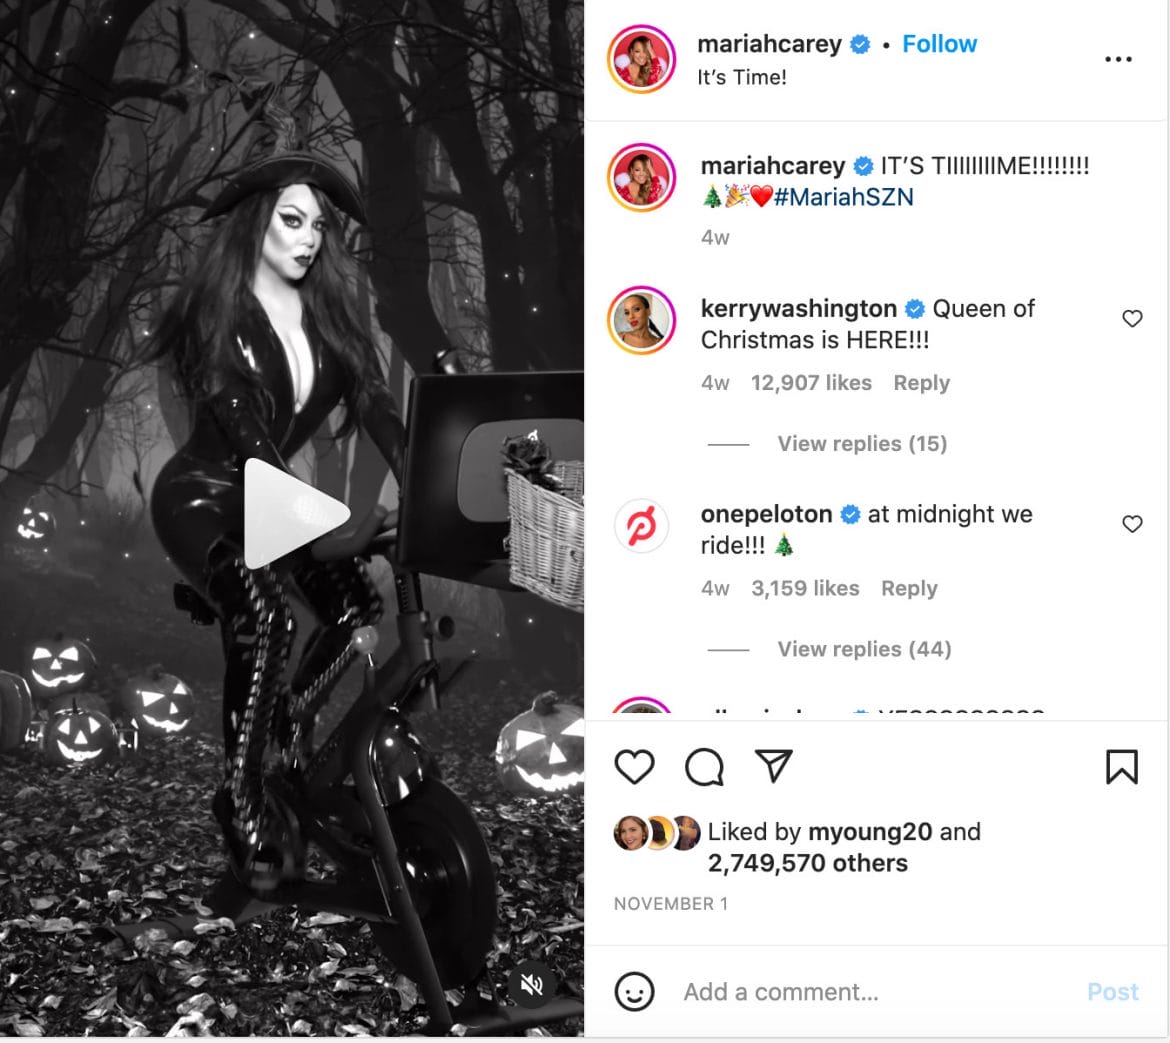 Mariah Carey "it's time" video showing her on a Peloton Bike.